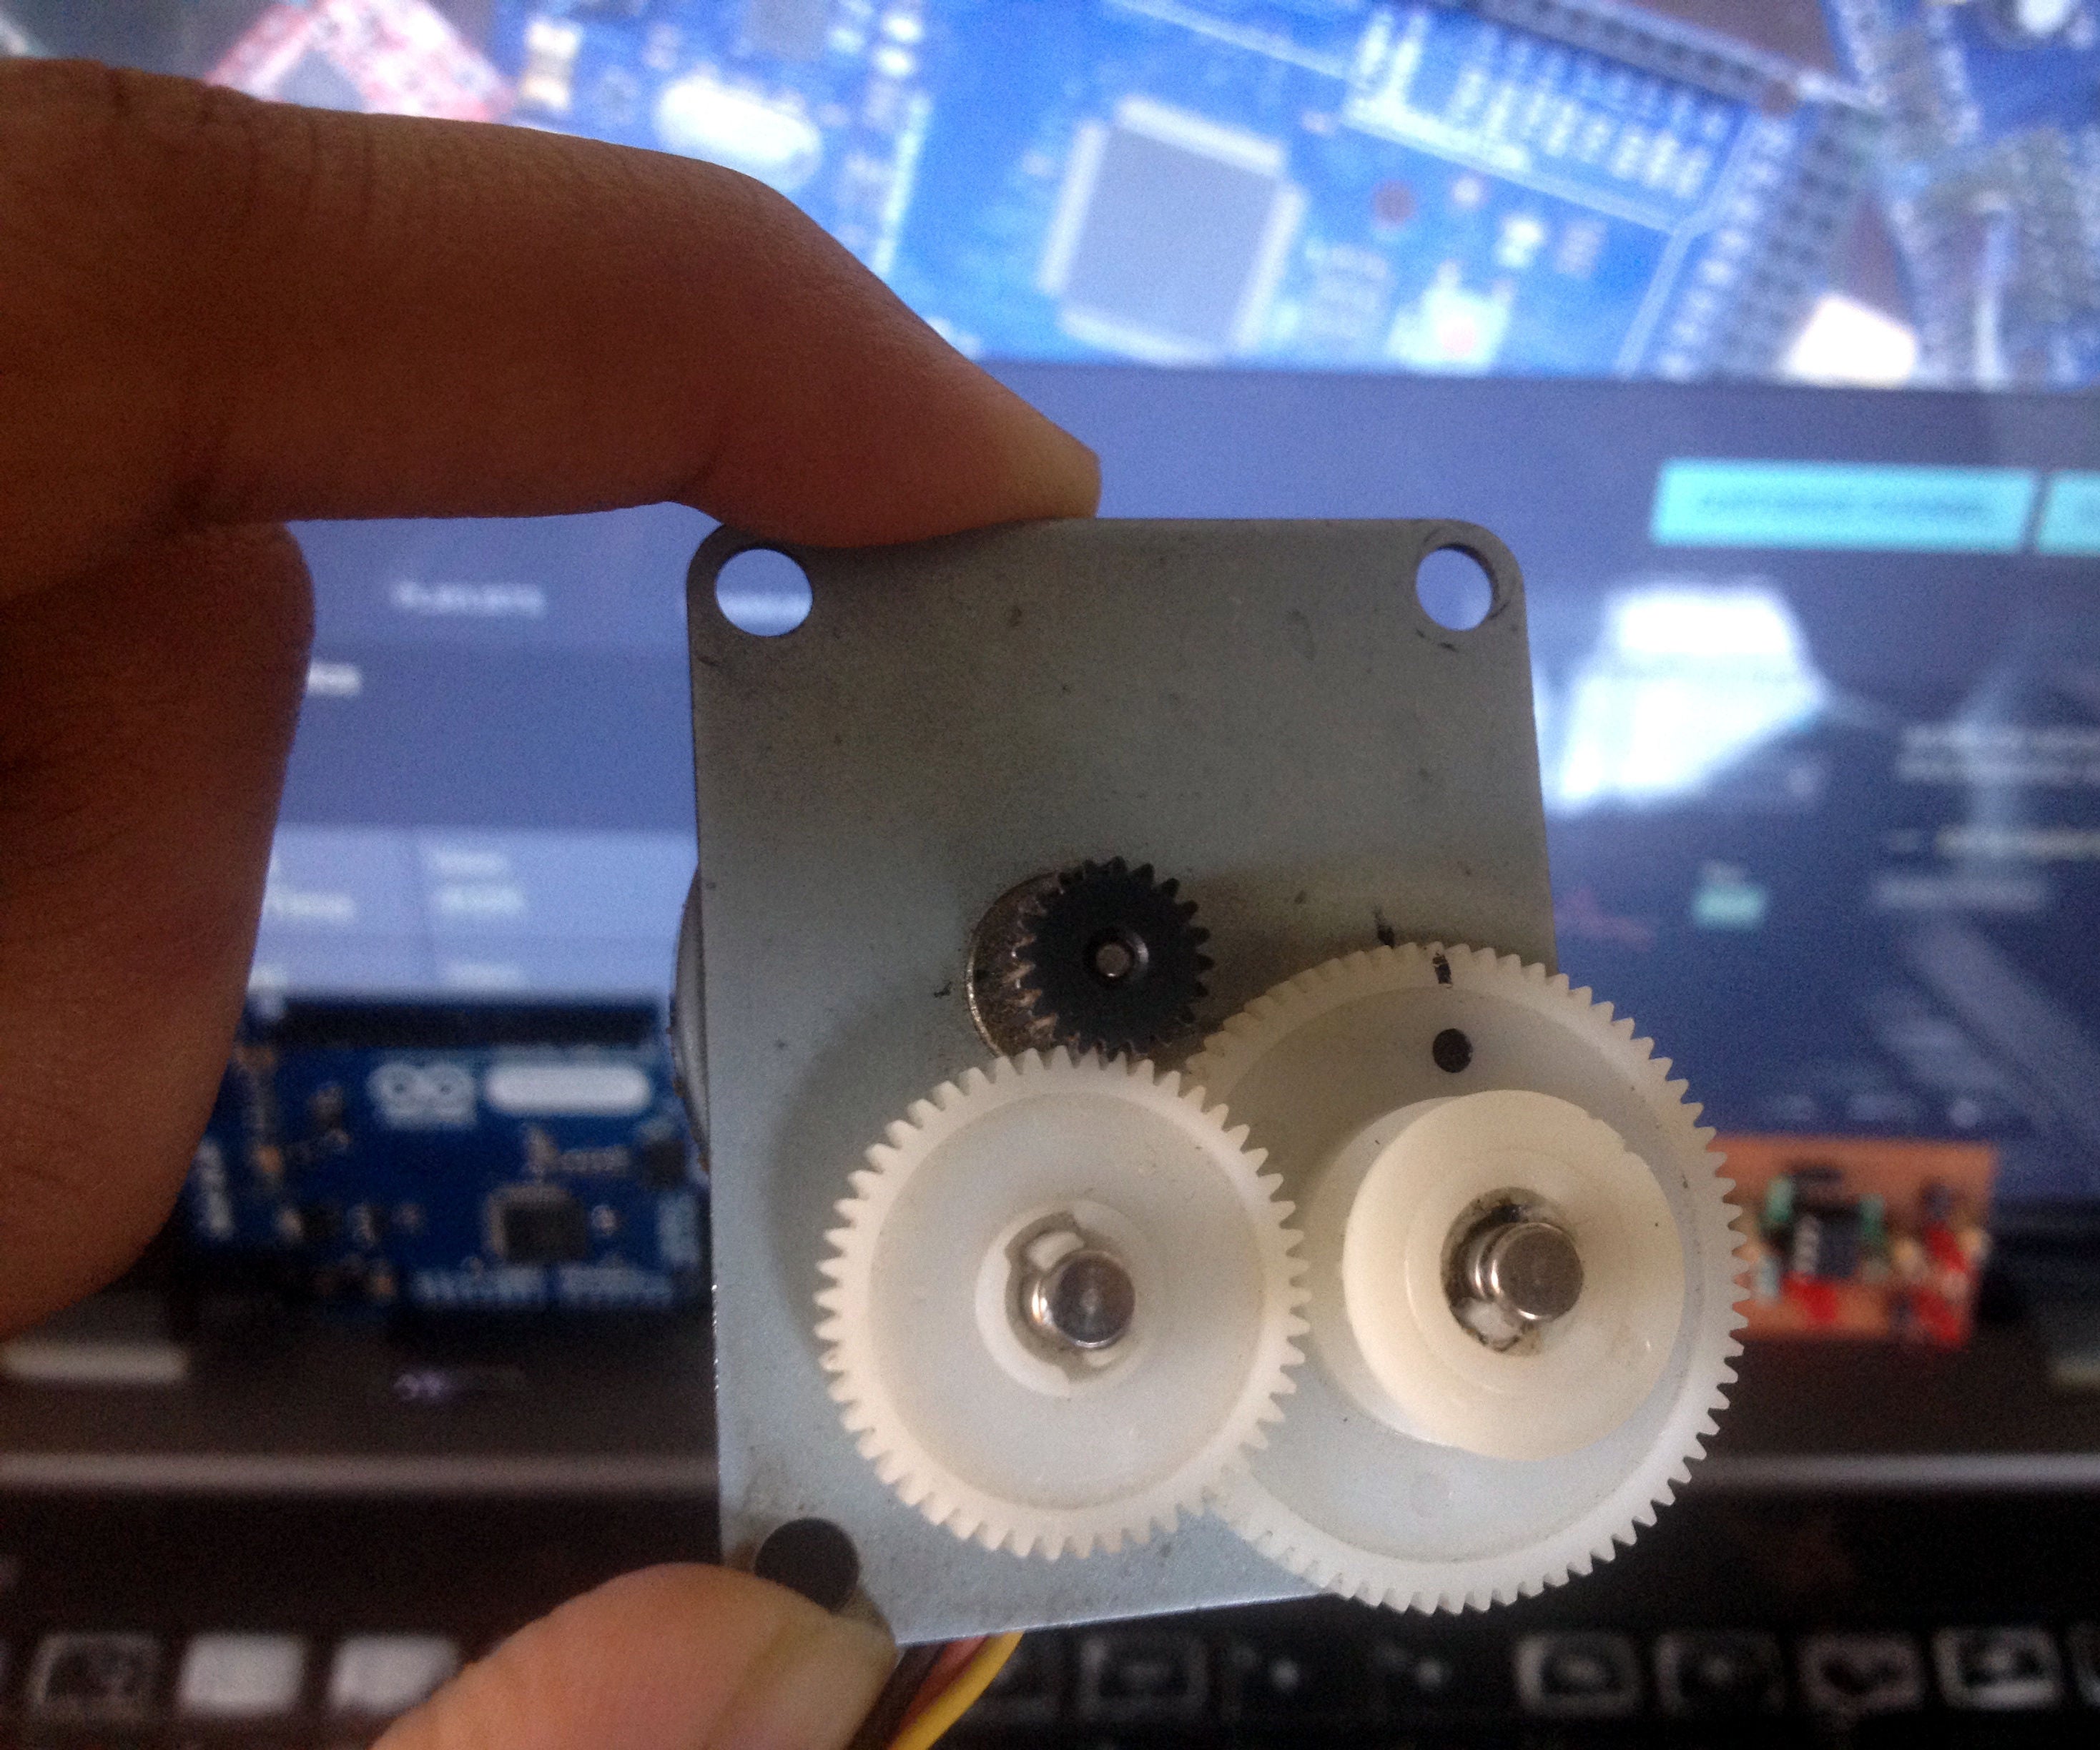 Control Your Computer With a Stepper Motor!